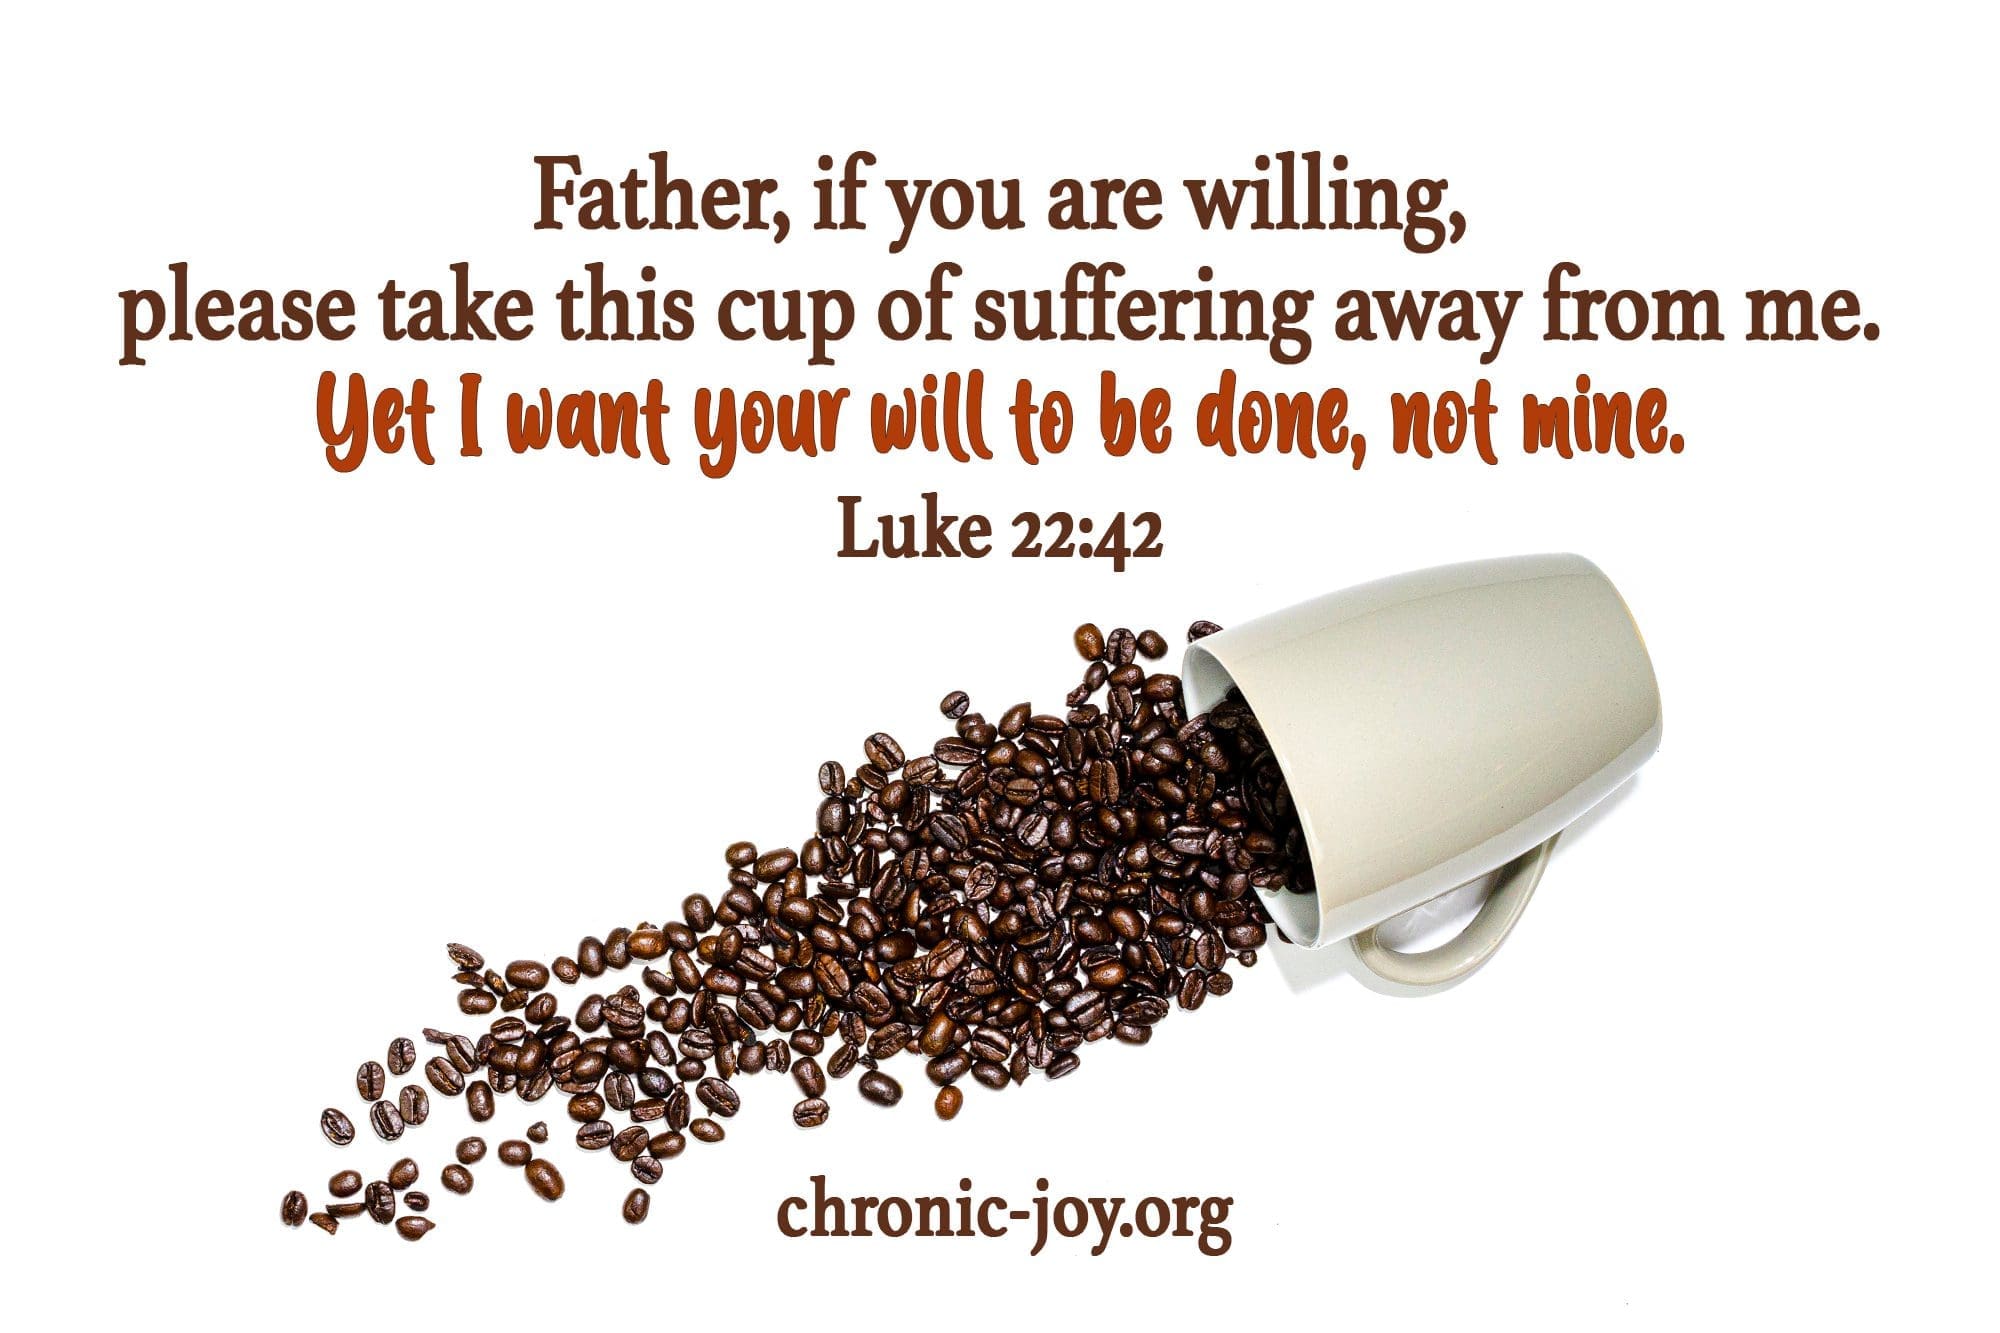 "Father, if you are willing, please take this cup of suffering away from me. Yet I want your will to be done, not mine." Luke 22:42